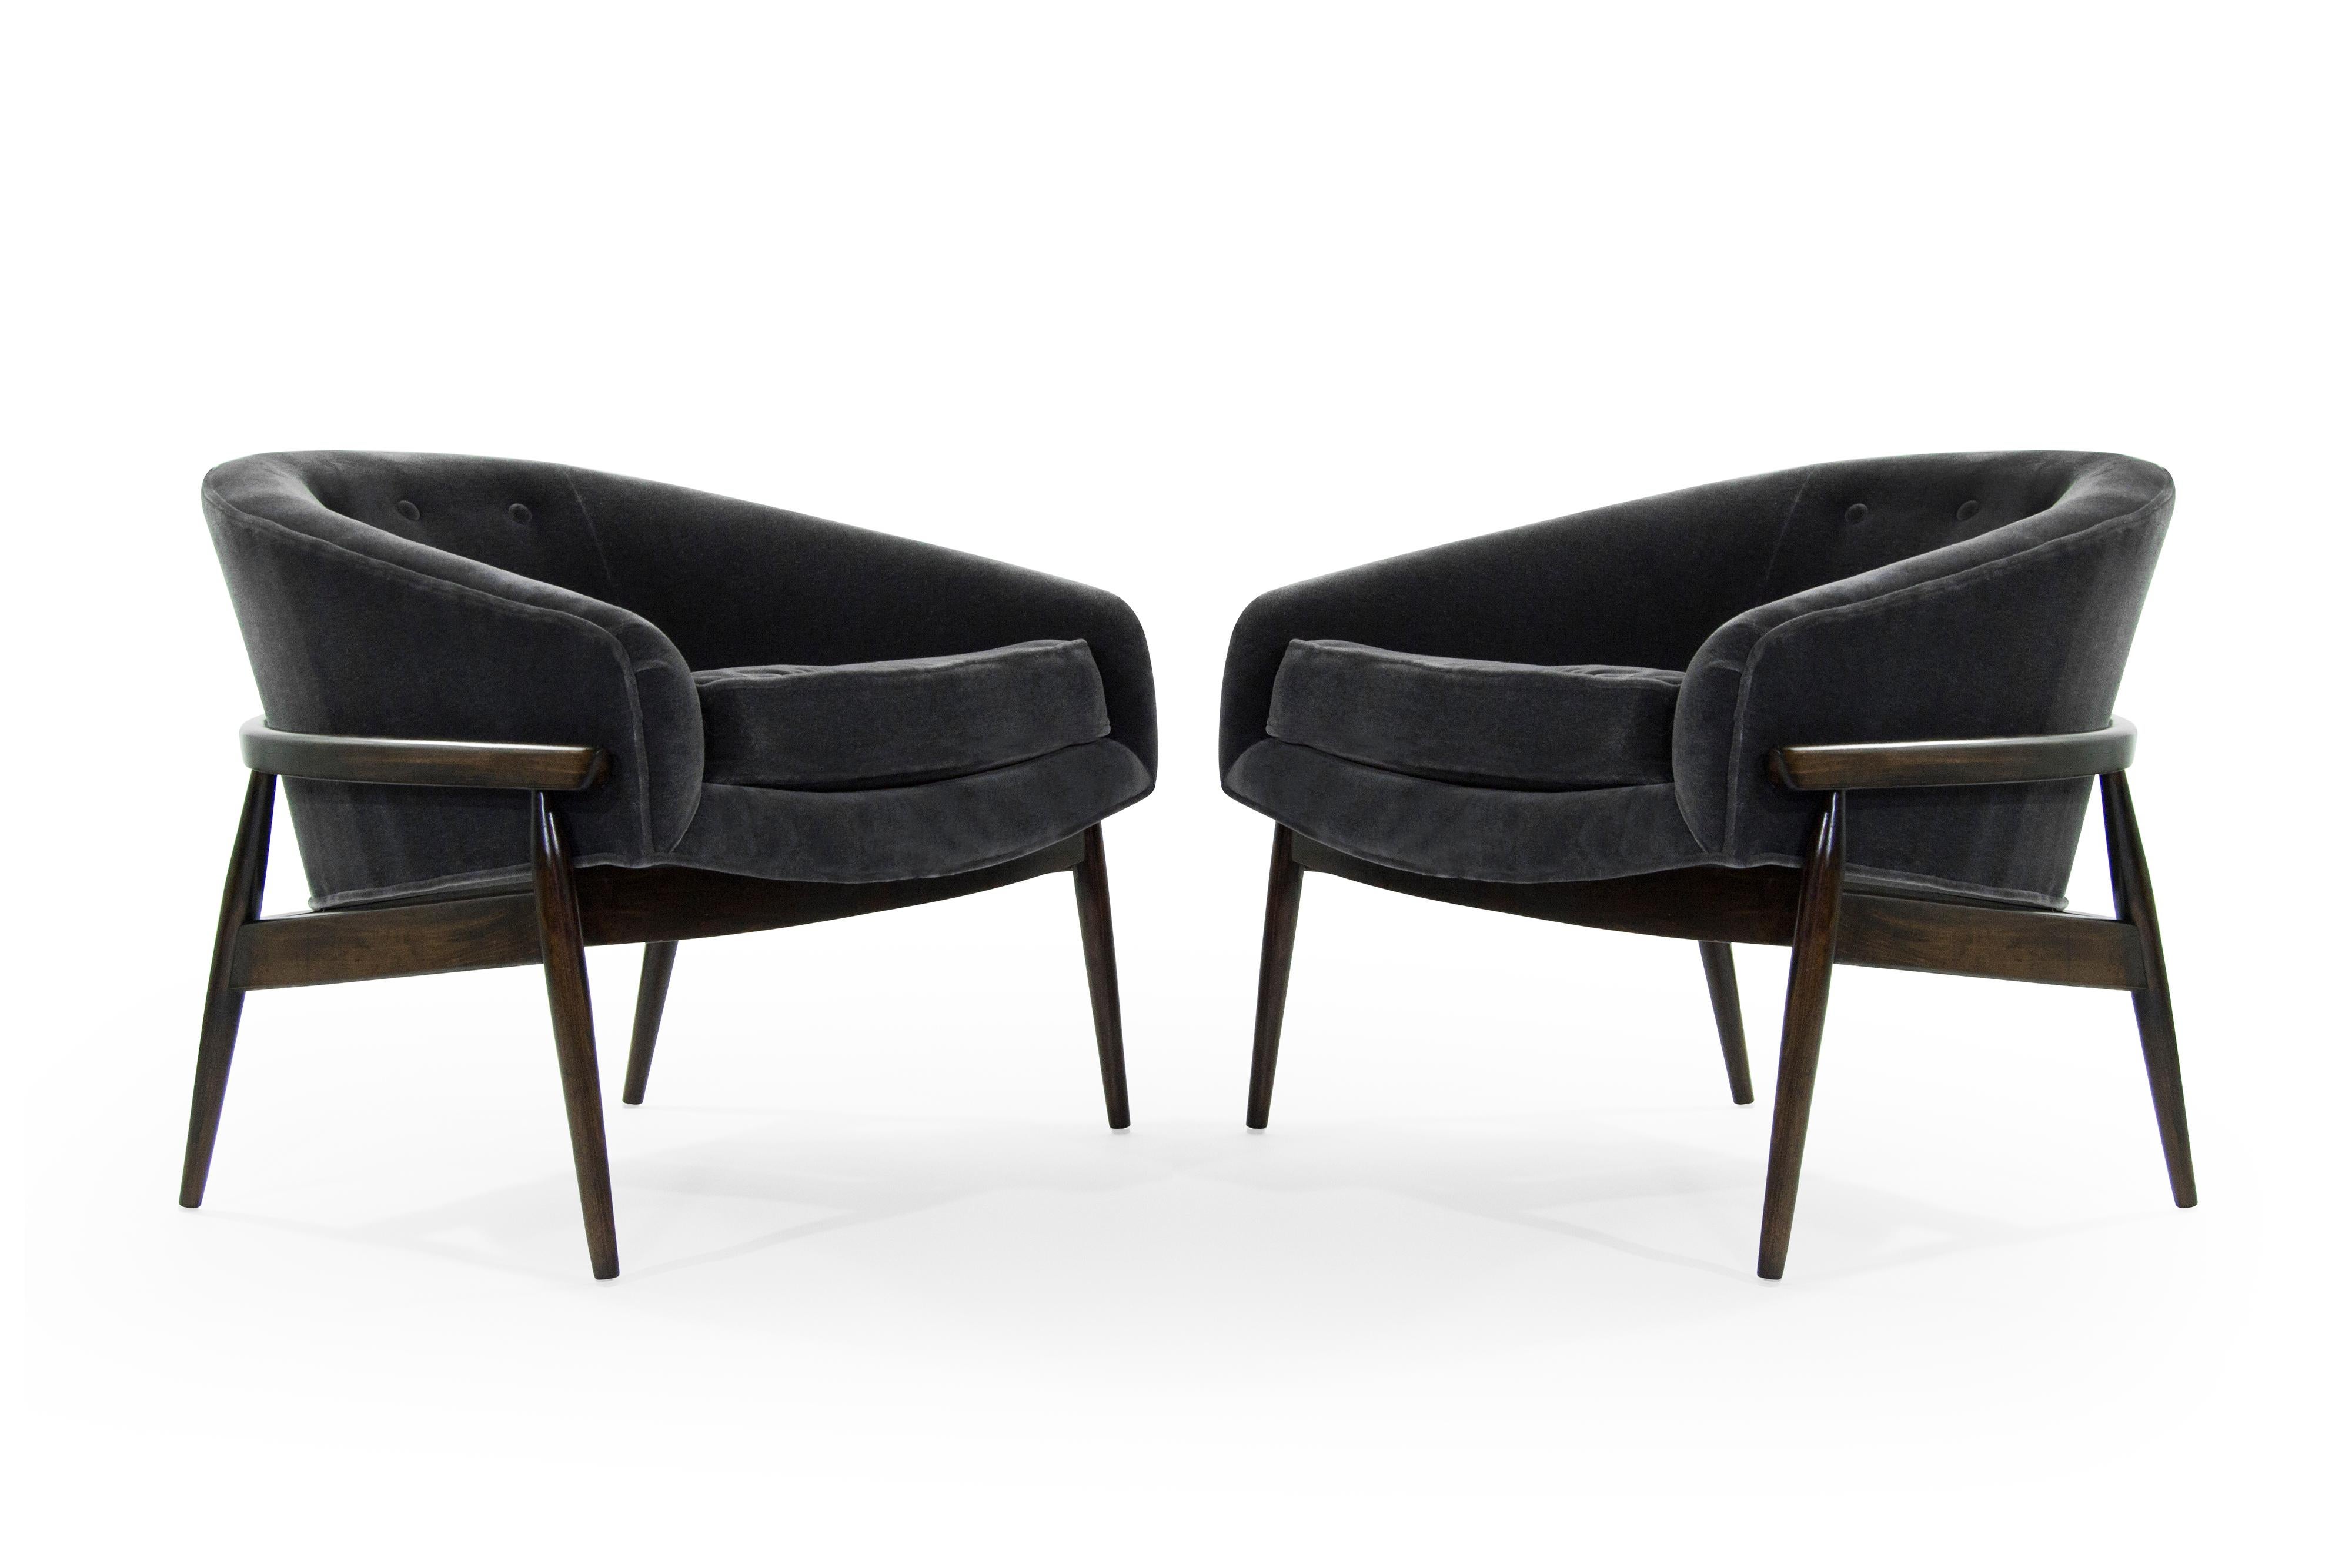 Rare pair of low and wide profile lounge chairs by Milo Baughman for Thayer Coggin, circa 1950s.

Newly upholstered in charcoal mohair, sculptural walnut frames fully restored.